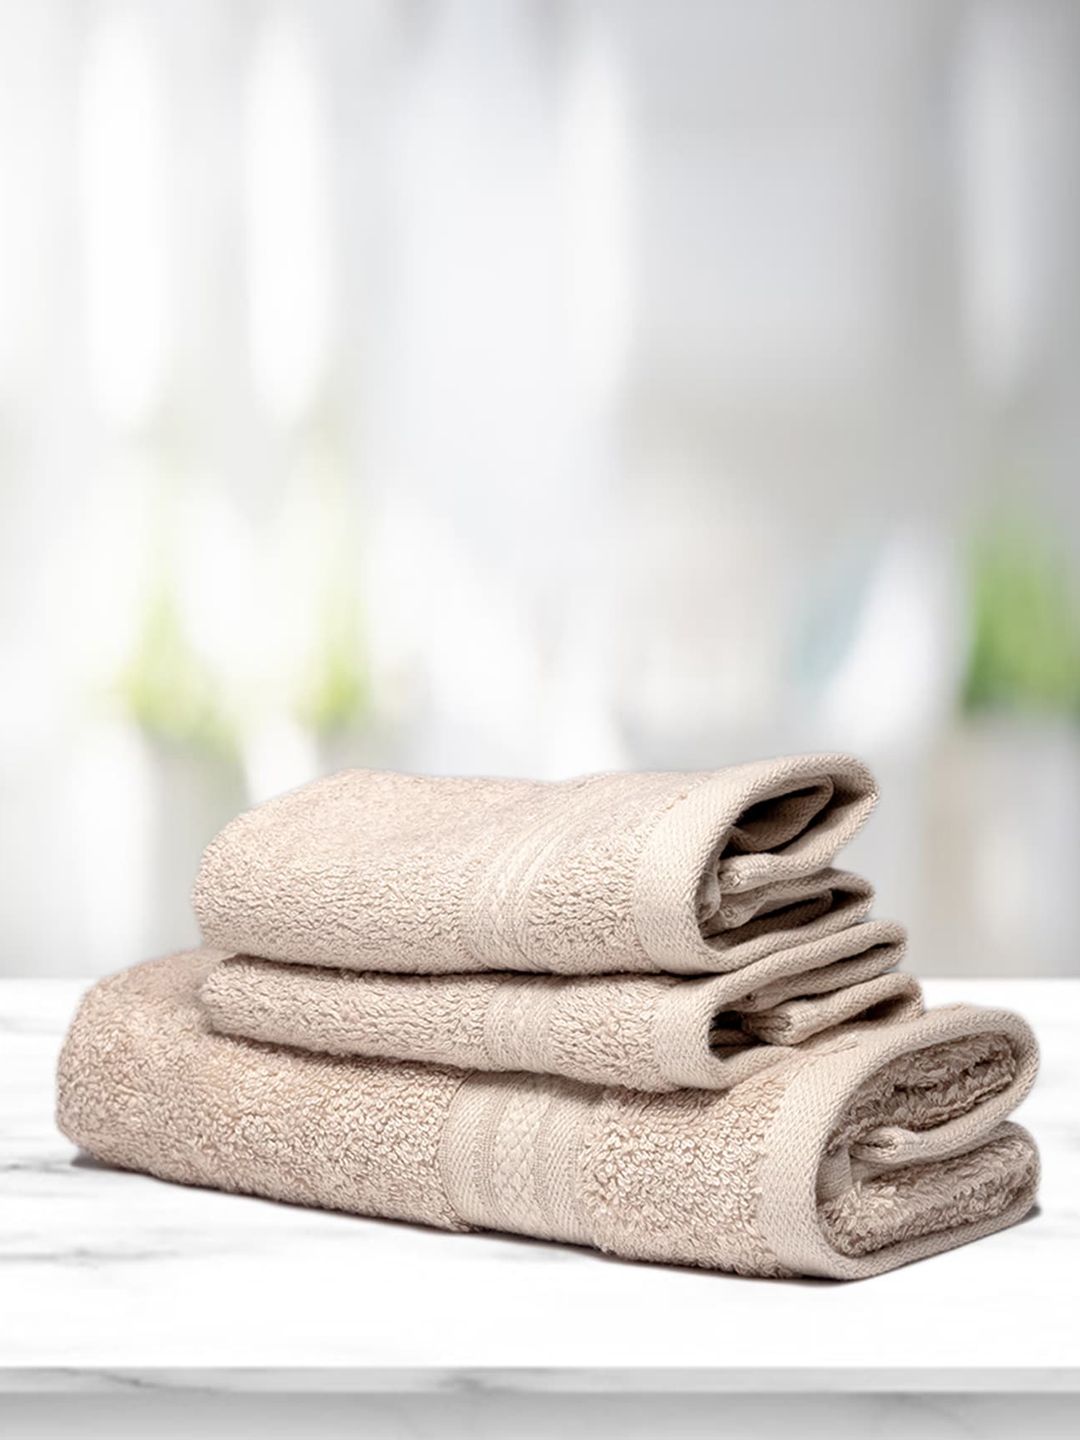 Kawach Cream-Coloured Pack of 3 Antimicrobial Bamboo Towels Price in India